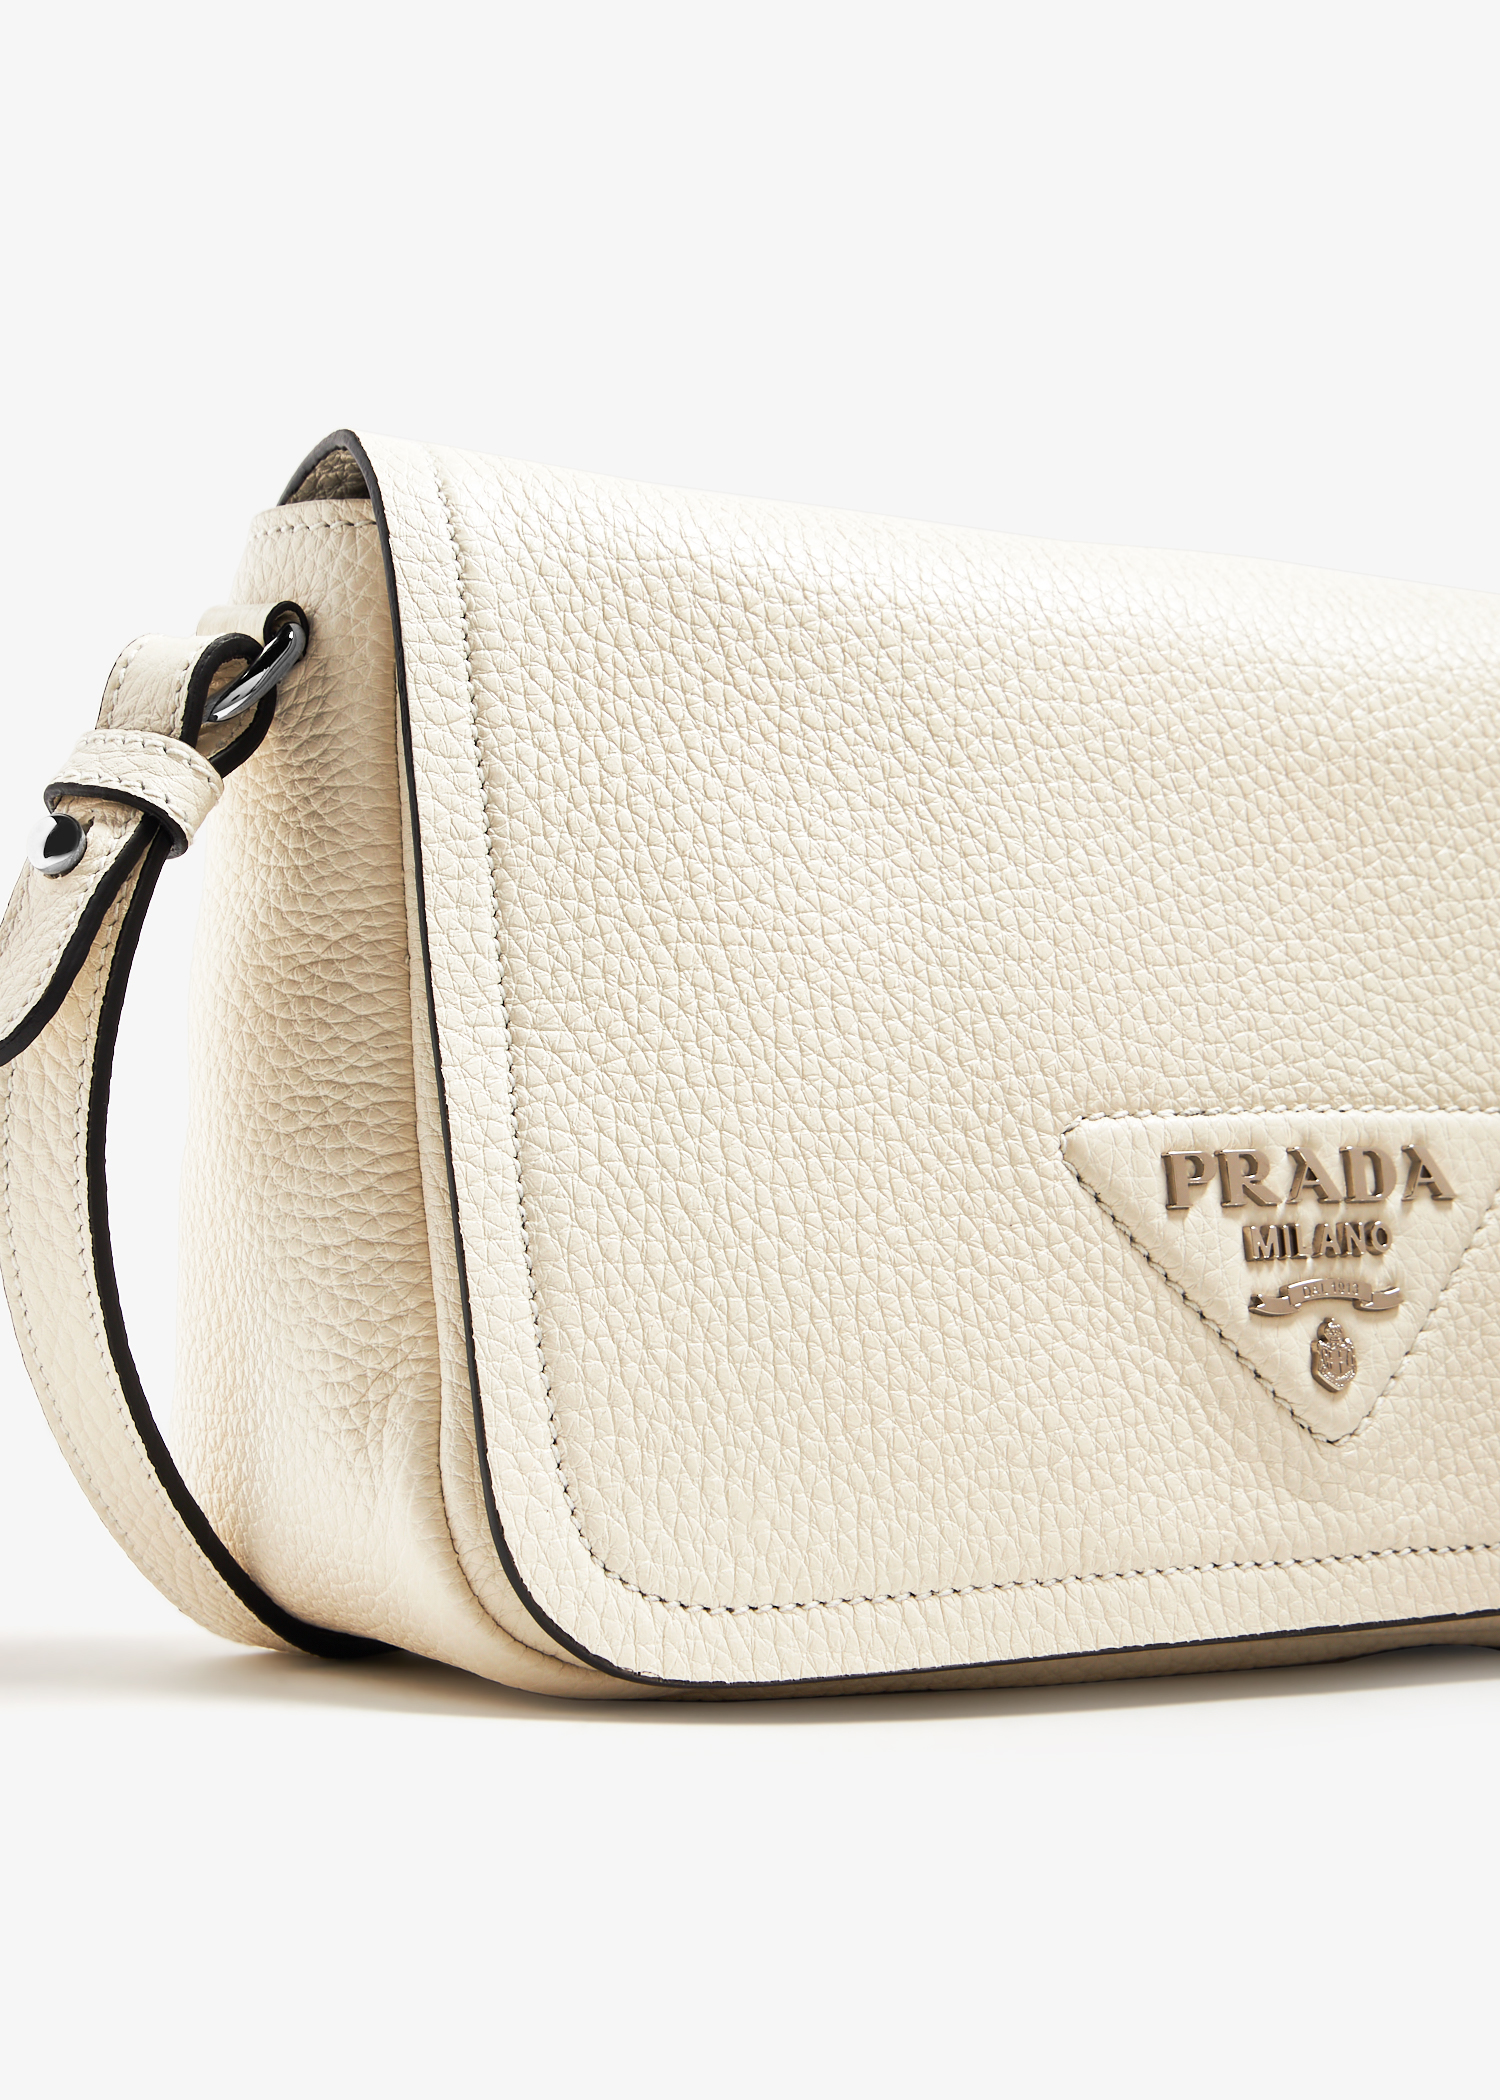 Prada Shoulder Bags Sale South Africa - Leather Bag With Shoulder Strap  Womens White